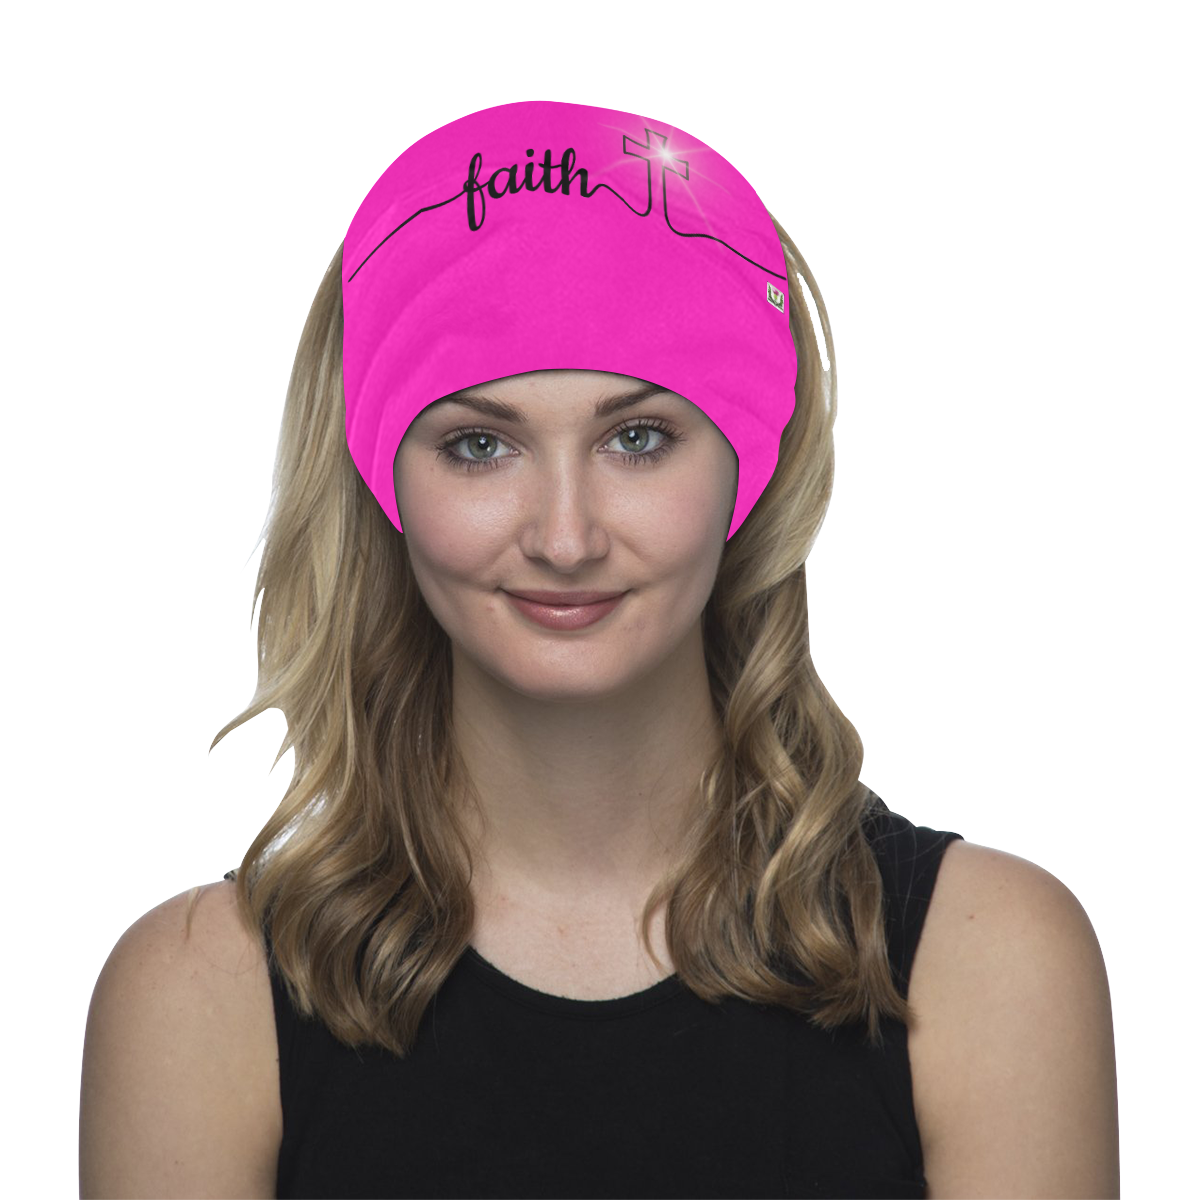 Fairlings Delight's The Word Collection- Faith 53086d10 Multifunctional Headwear